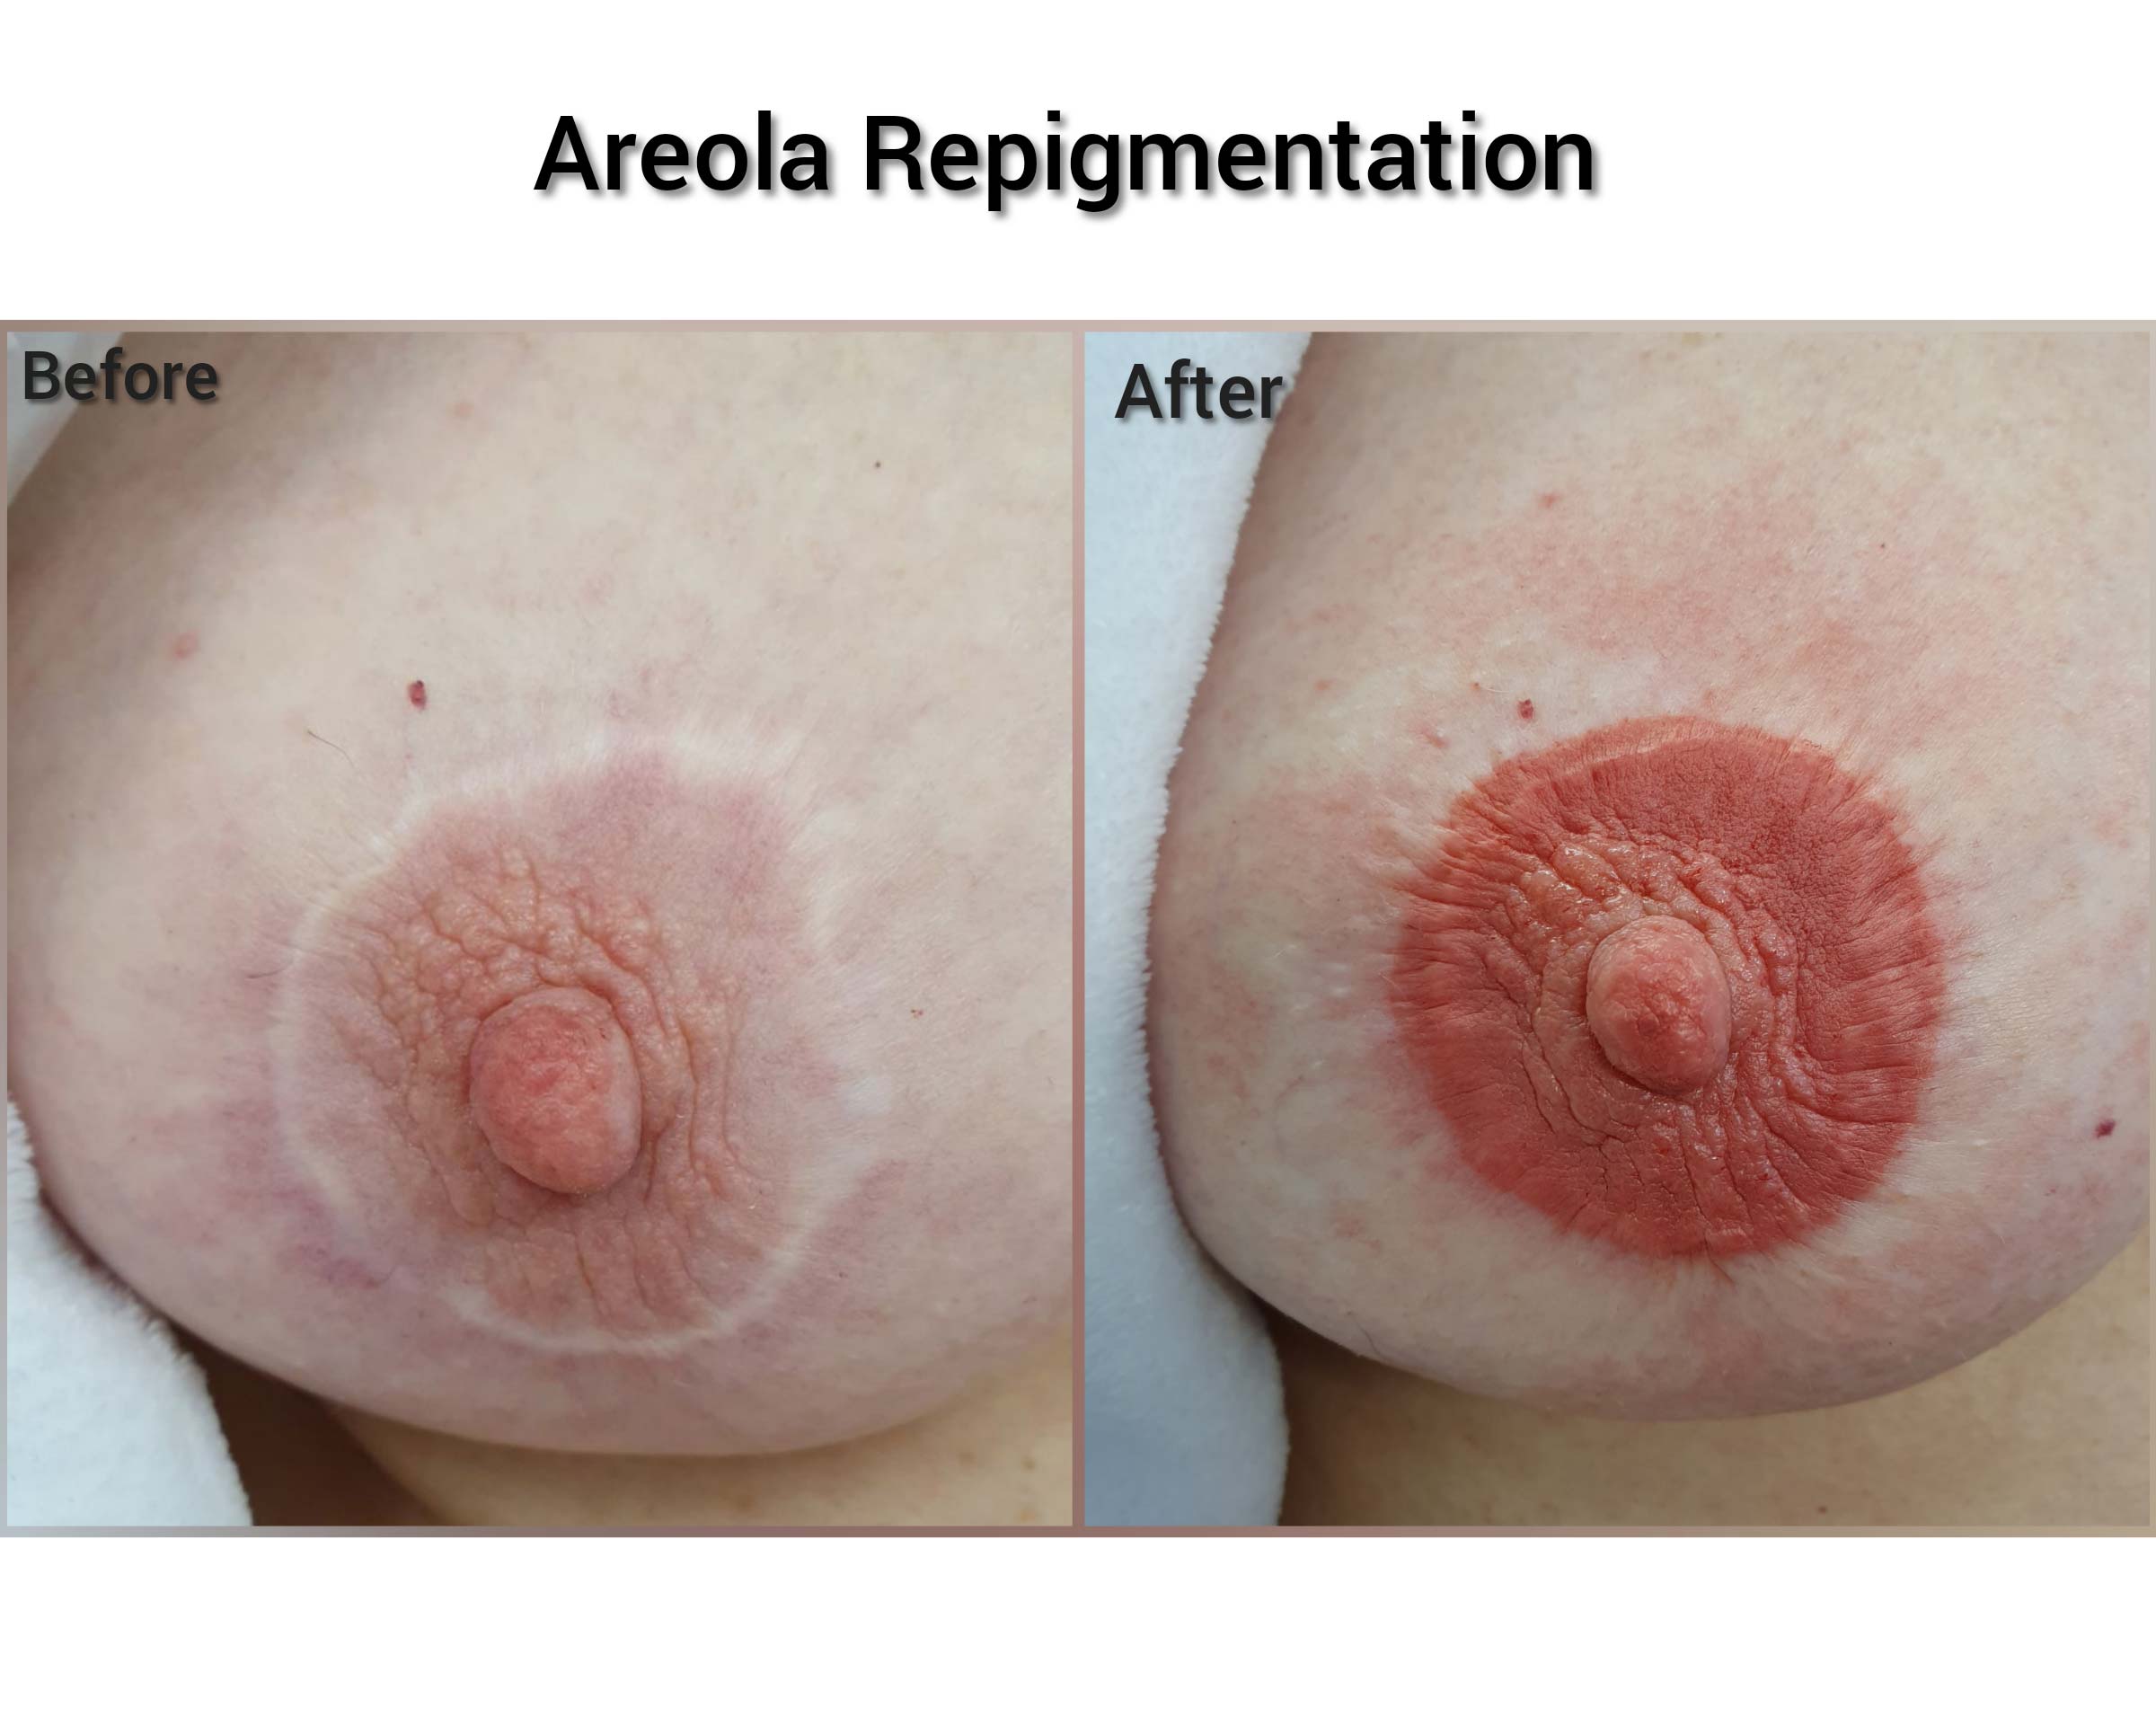 Areola Repigmentation. Cosmetic and Mediical Tattoo by Dasha. Permanent makeup and reconstructive tattoo, scalp micro-pigmentation in Christchurch, New Zealand